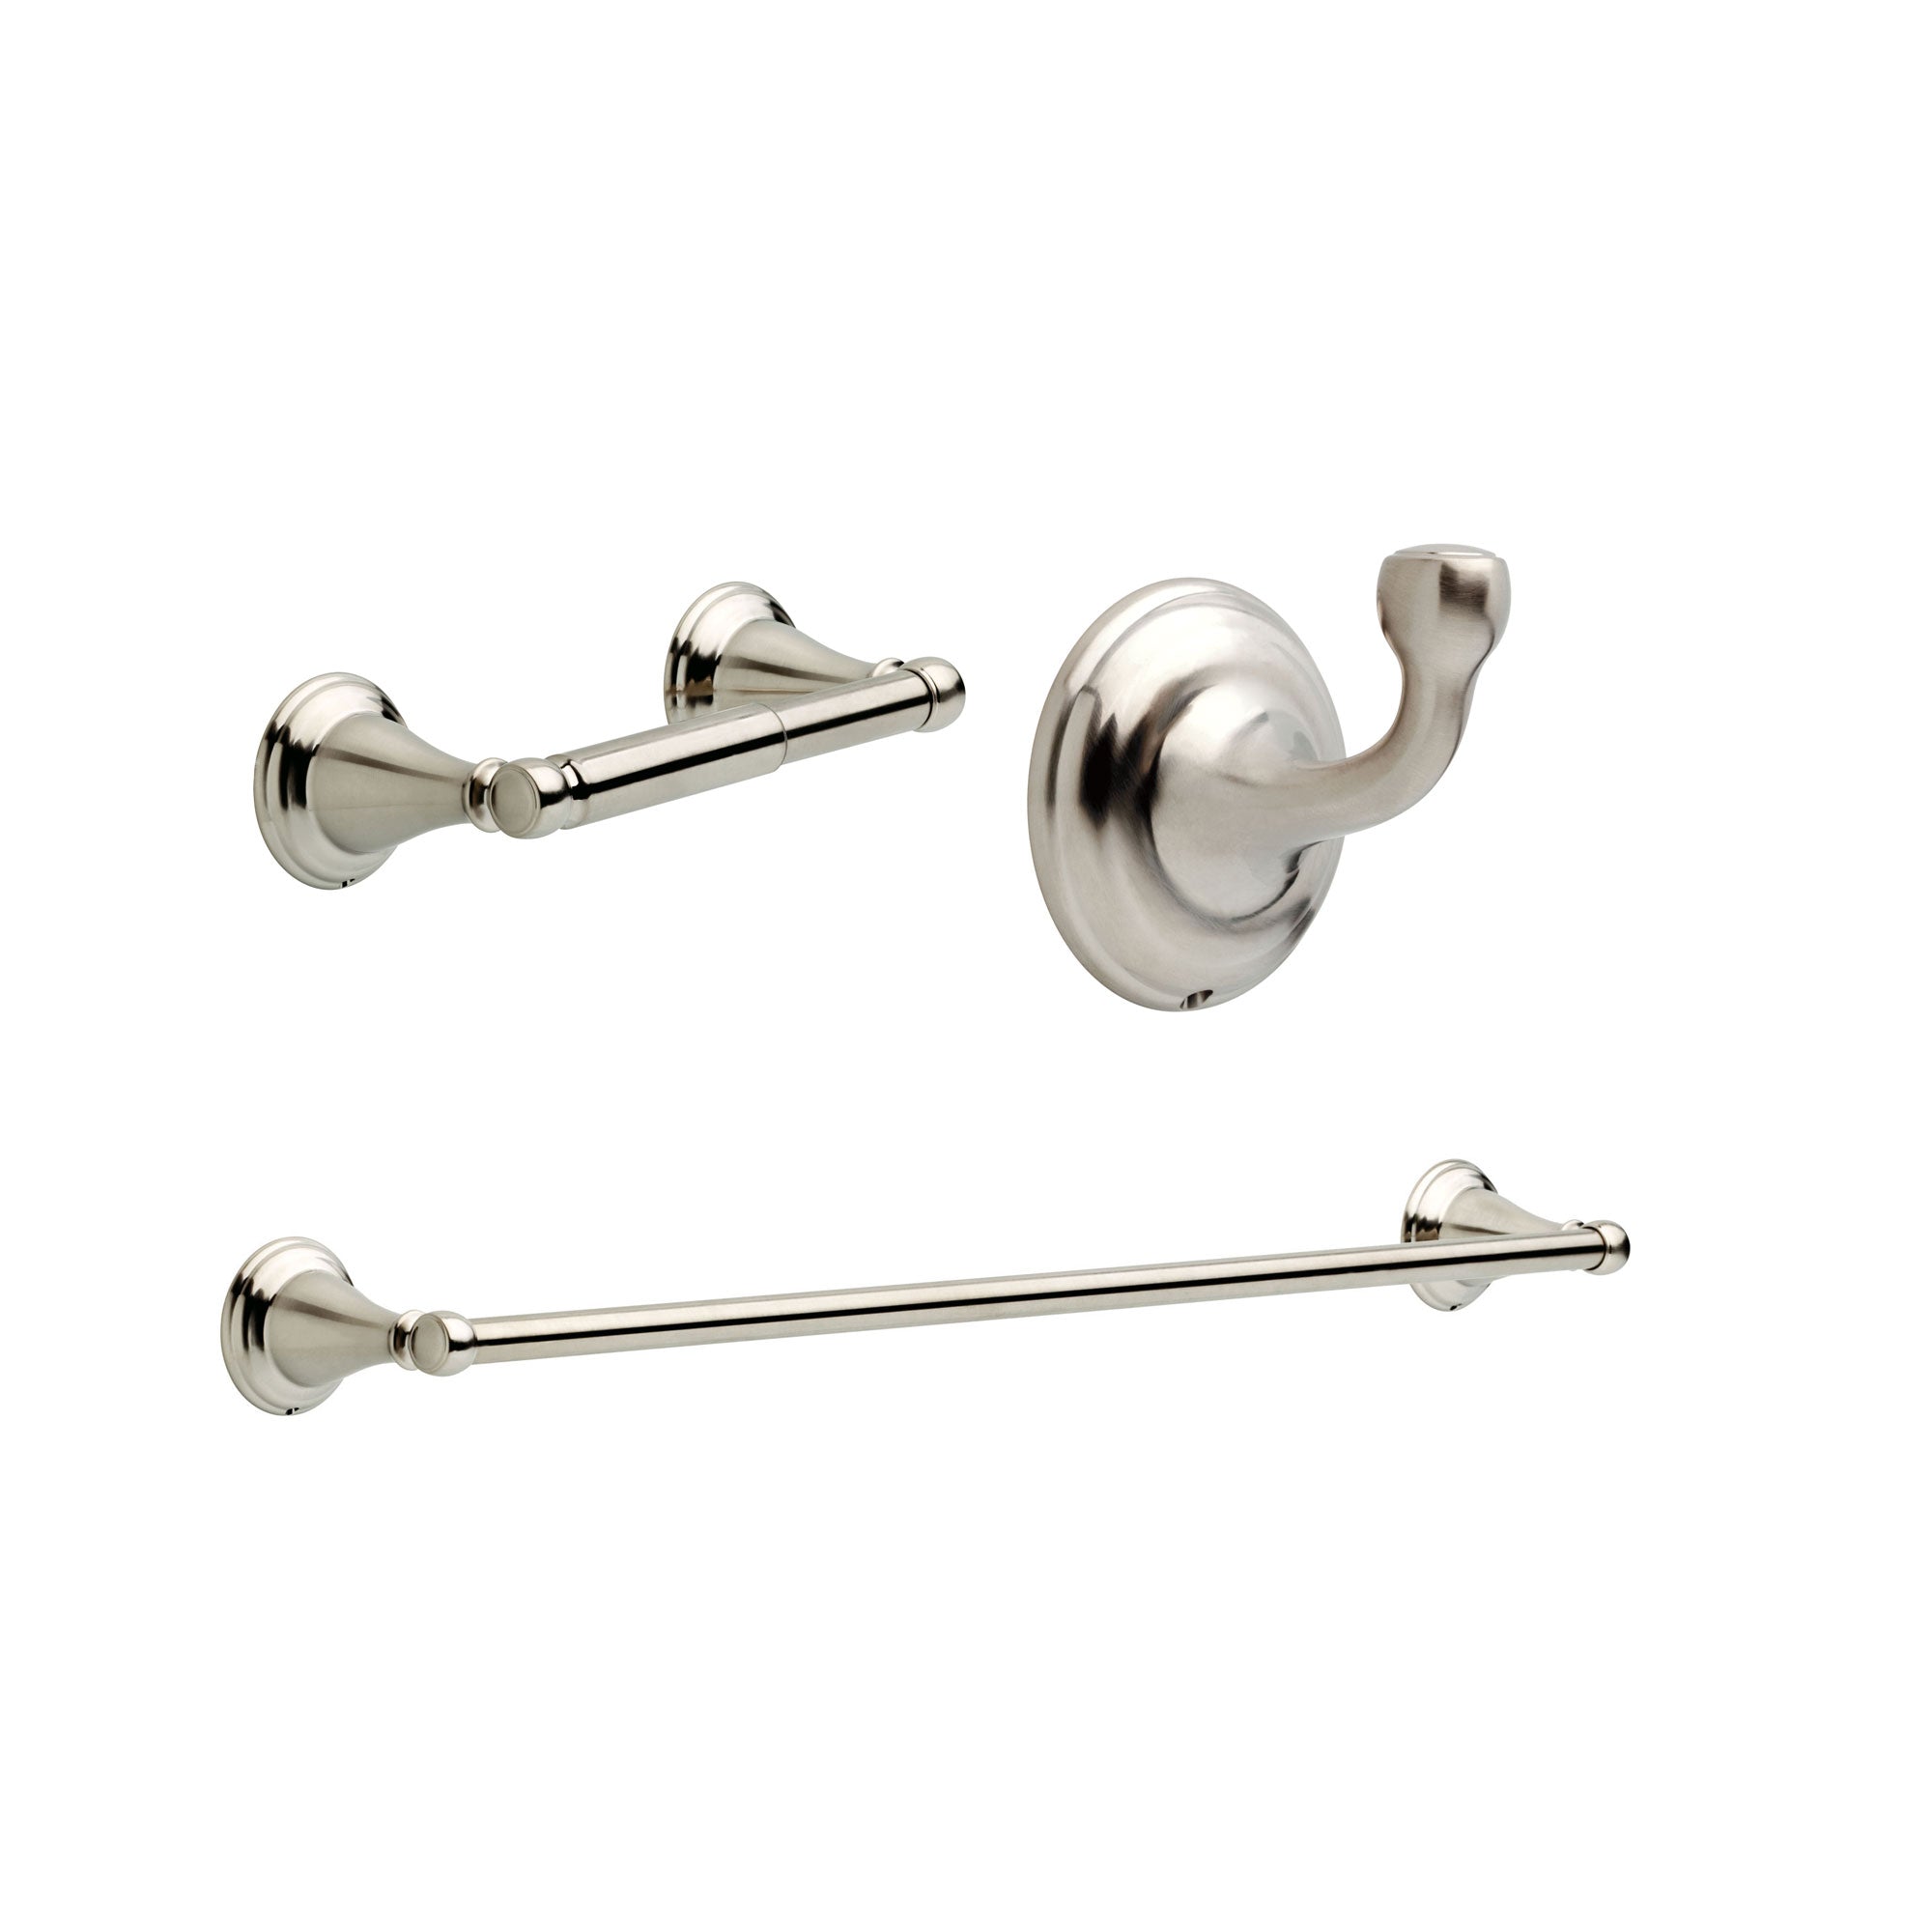 Delta Windemere Stainless Steel Finish BASICS Bathroom Accessory Set Includes: 24" Towel Bar, Toilet Paper Holder, and Robe Hook D10067AP